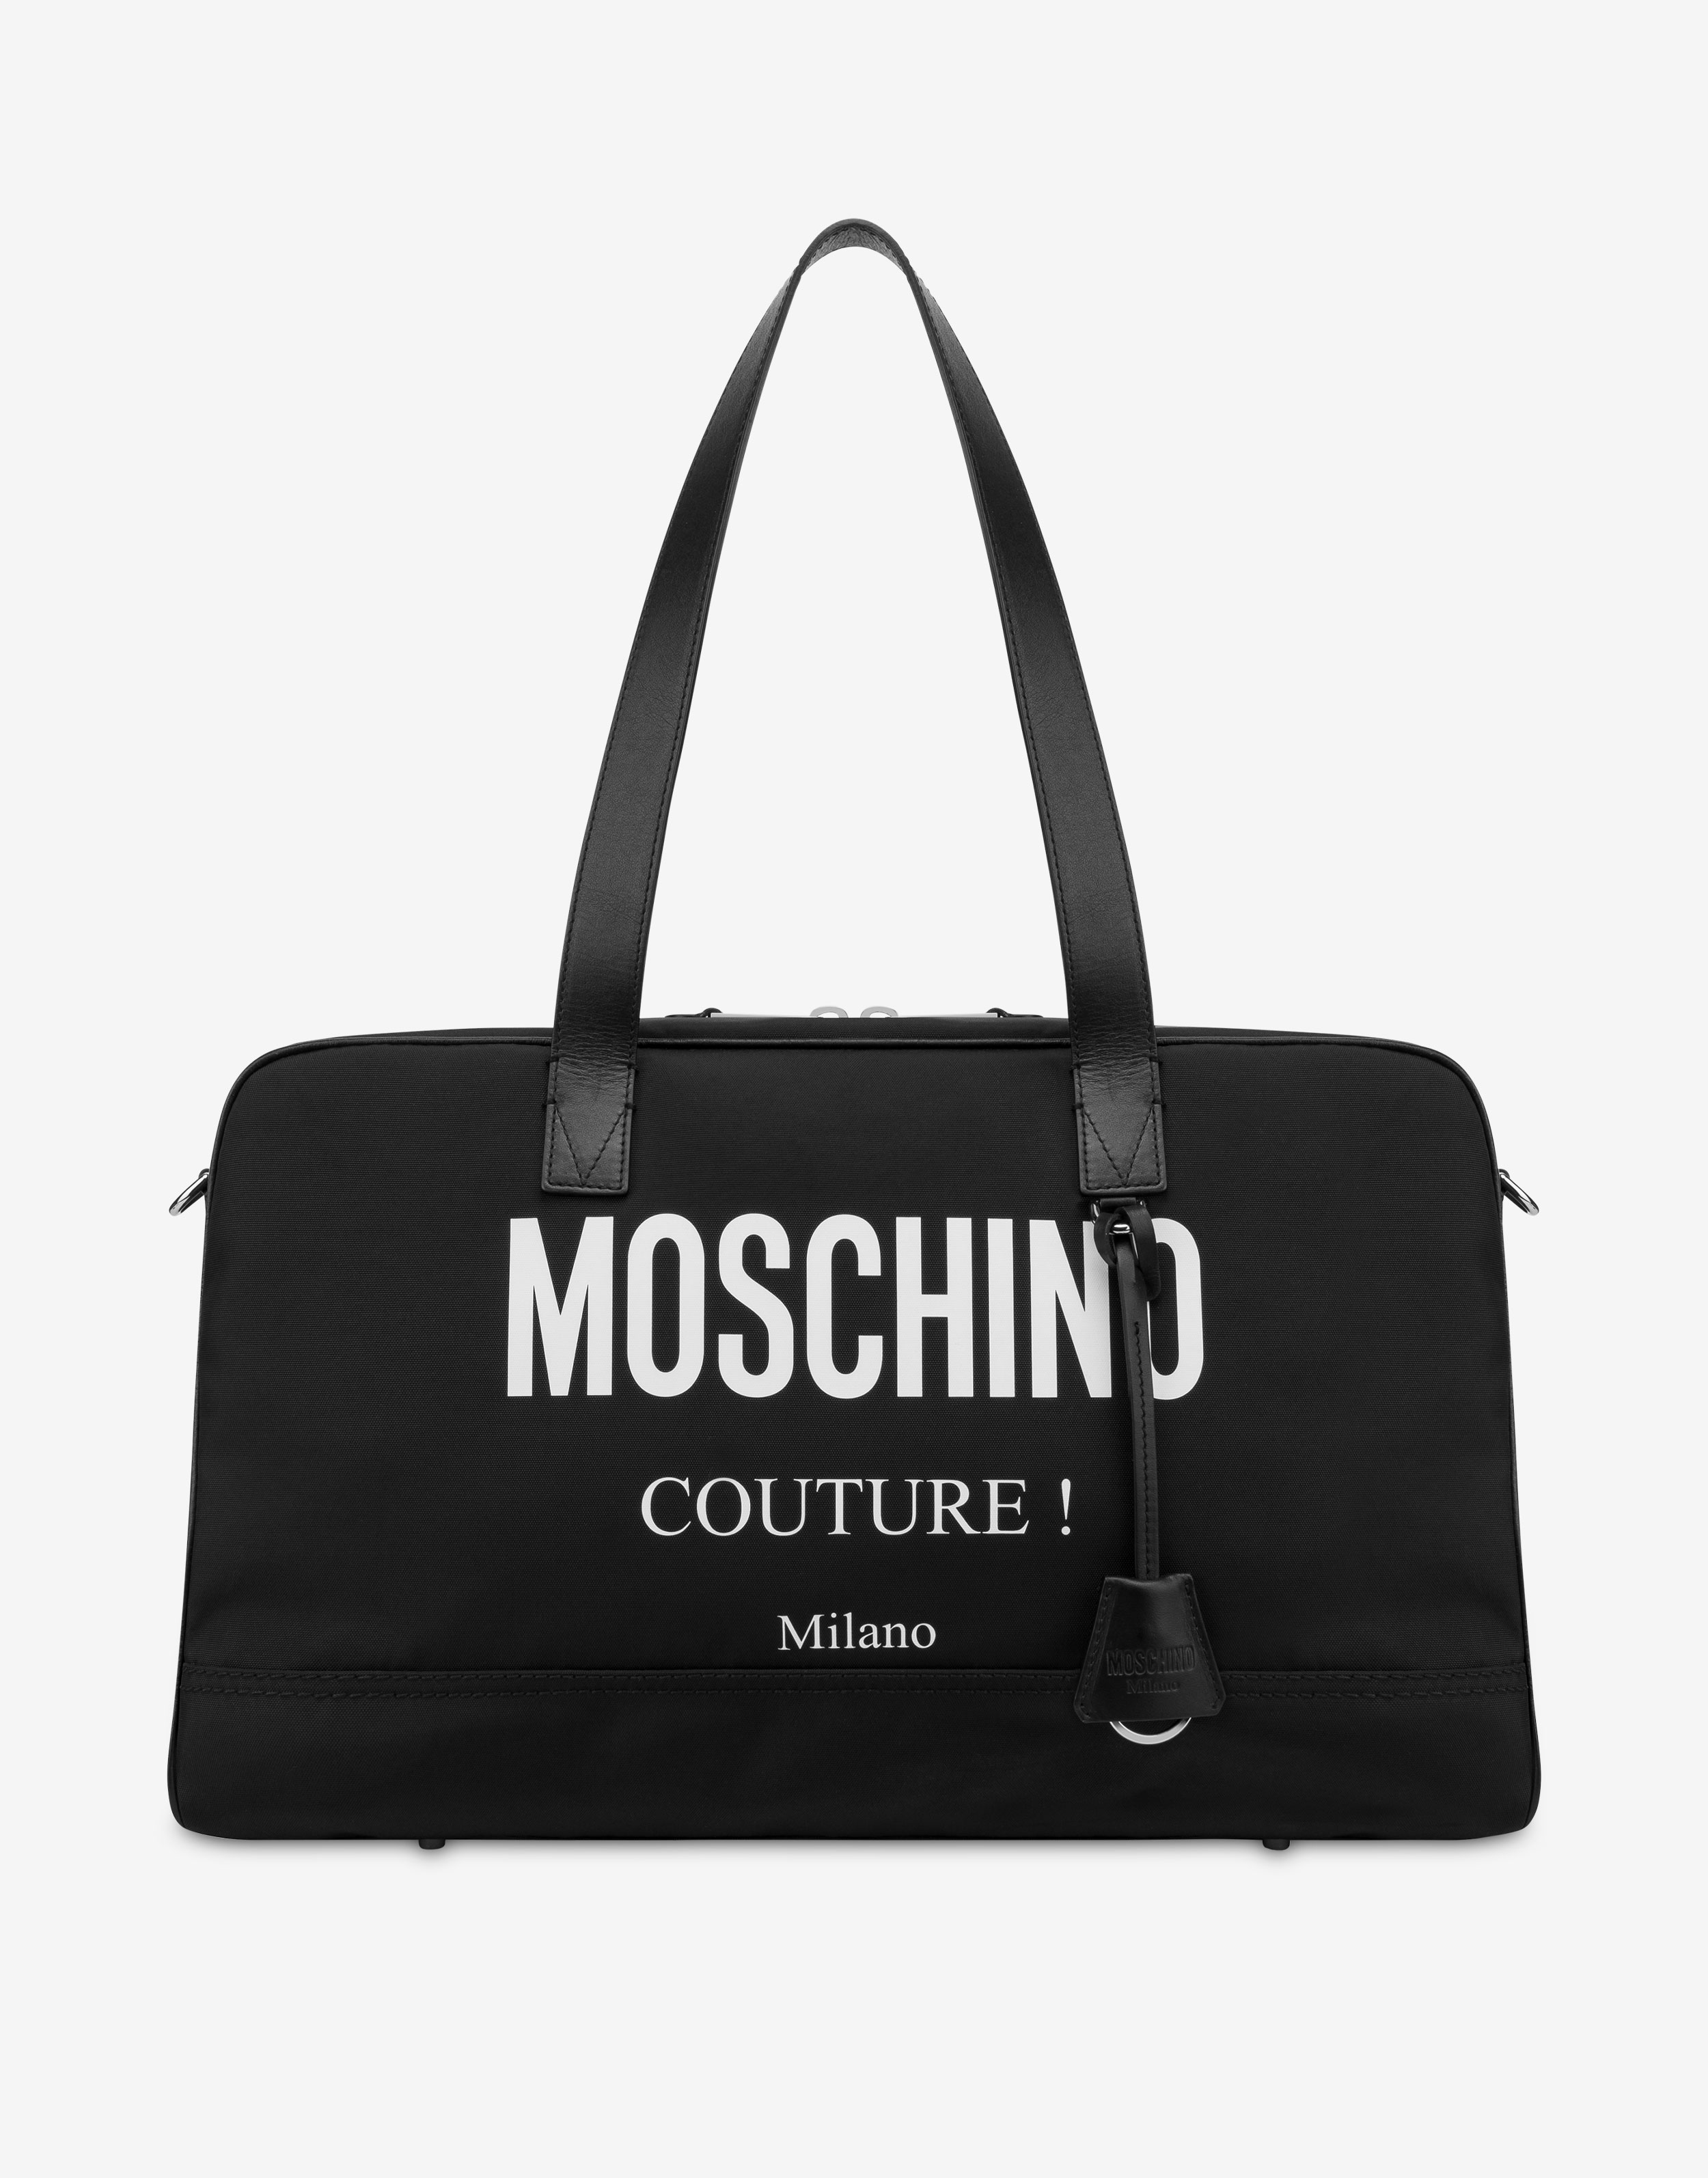 Moschino 包包for New Season - Official Store